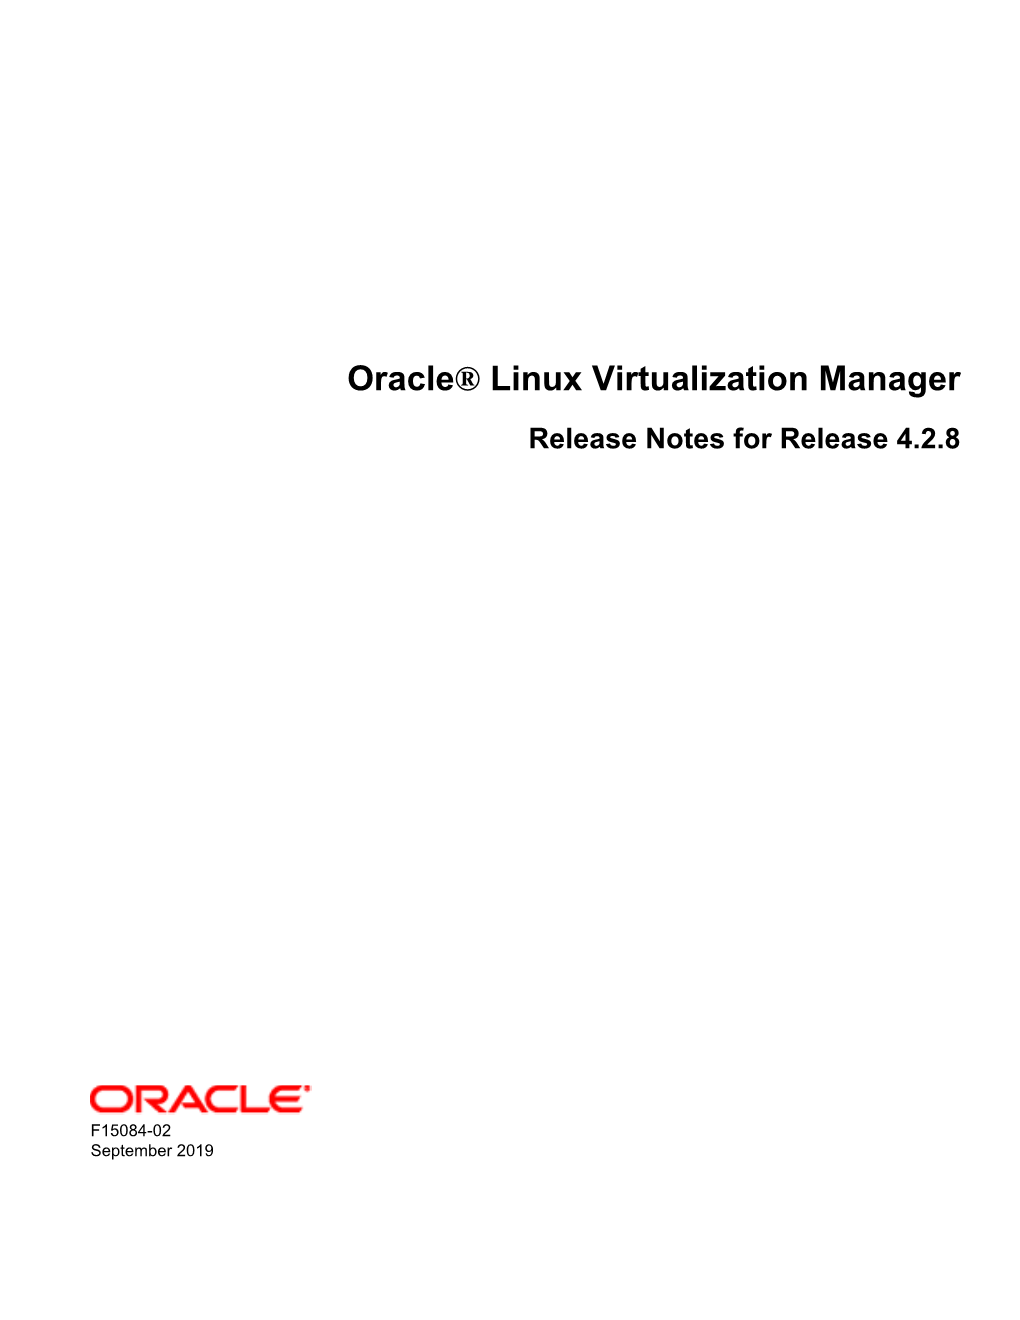 Oracle® Linux Virtualization Manager Release Notes for Release 4.2.8